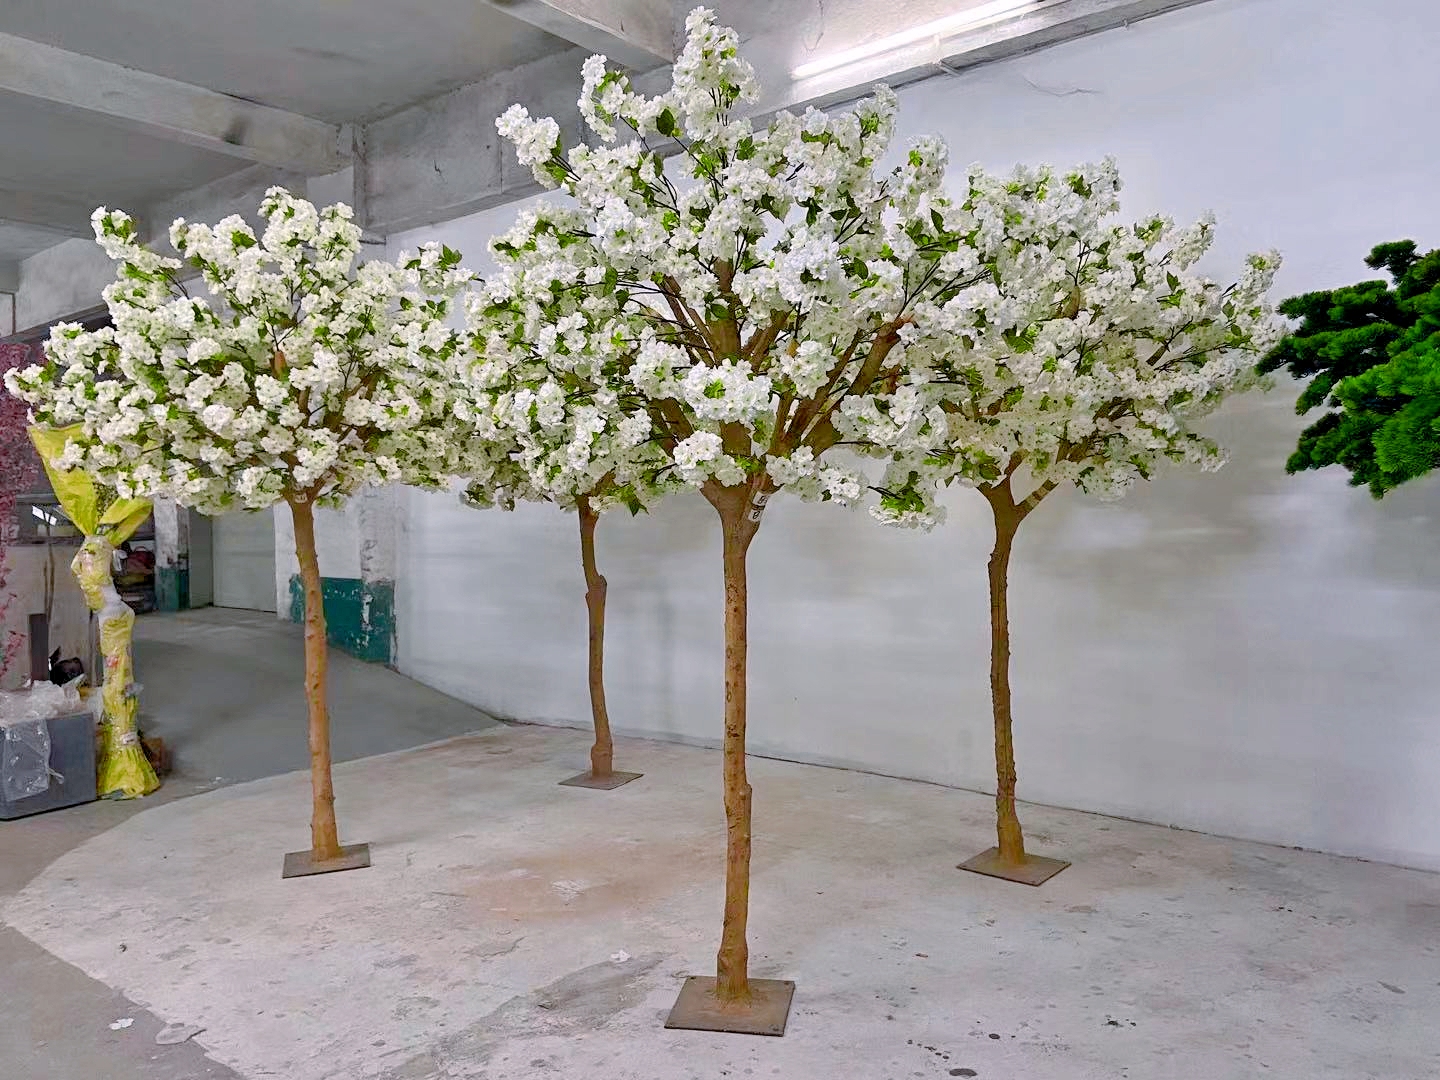 Small Wood Trunk Indoor Artificial White Cherry Blossom Tree for Wedding Both Sides Road Guide Decoration